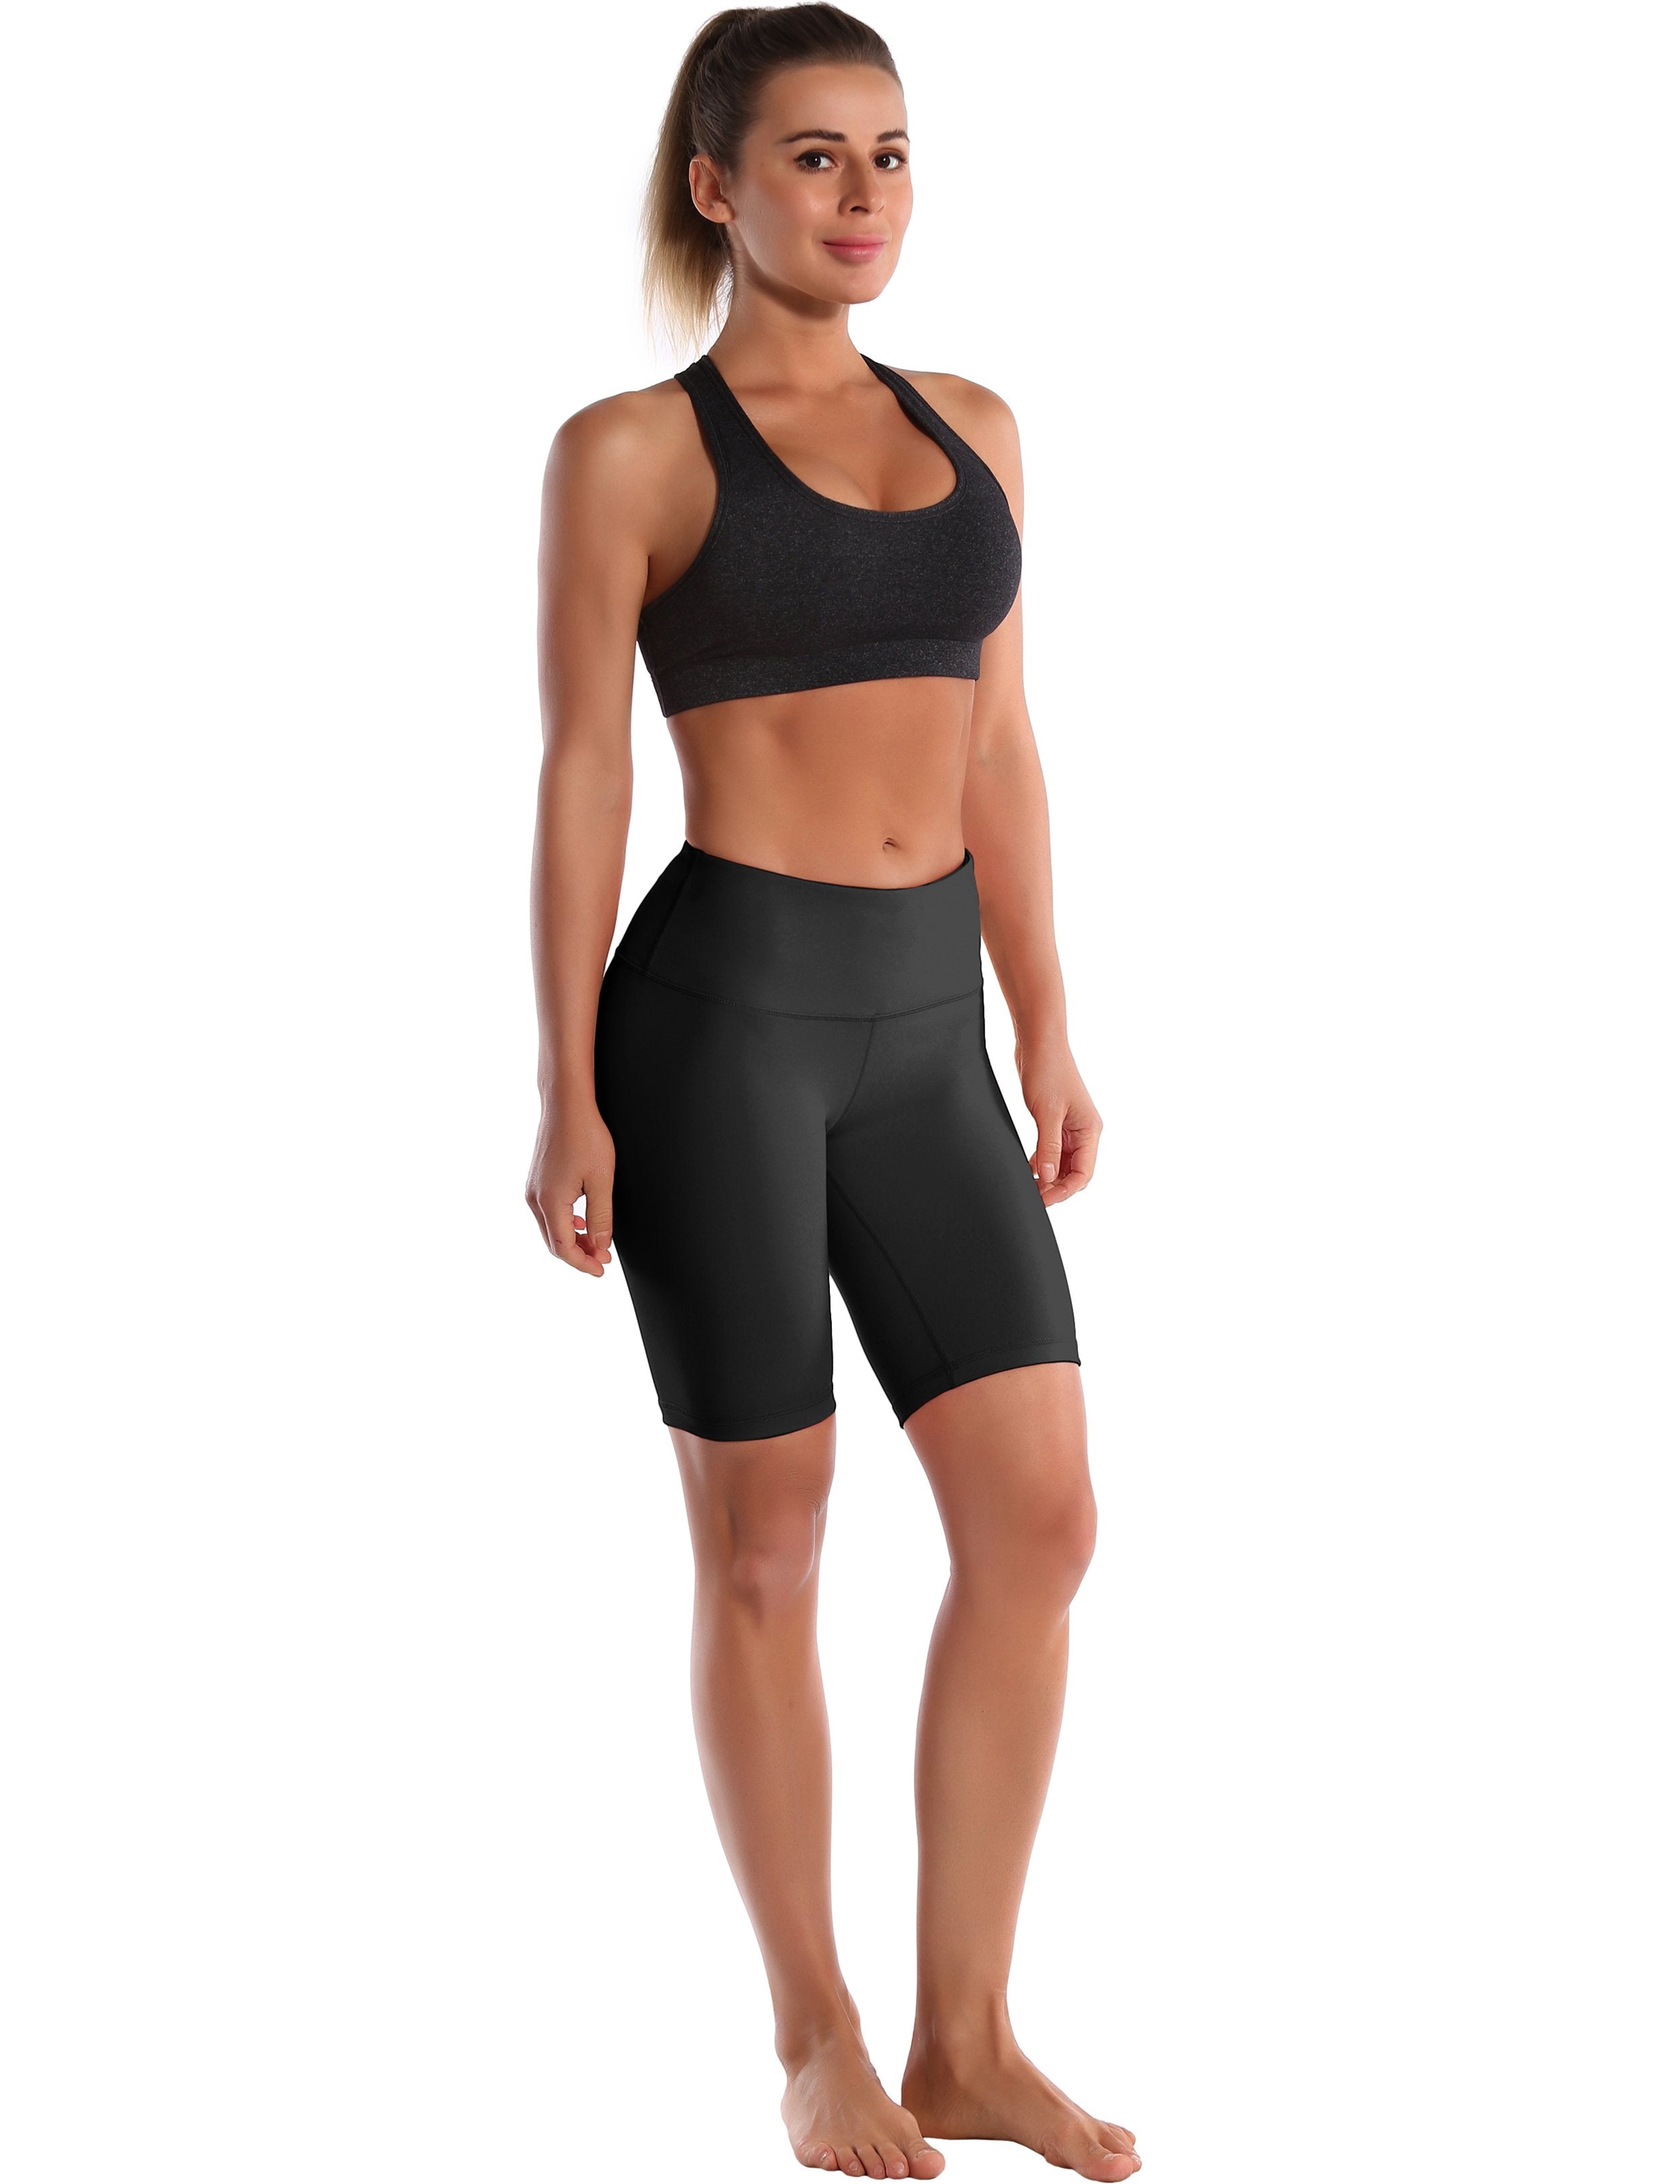 8" High Waist Jogging Shorts black Sleek, soft, smooth and totally comfortable: our newest style is here. Softest-ever fabric High elasticity High density 4-way stretch Fabric doesn't attract lint easily No see-through Moisture-wicking Machine wash 75% Nylon, 25% Spandex